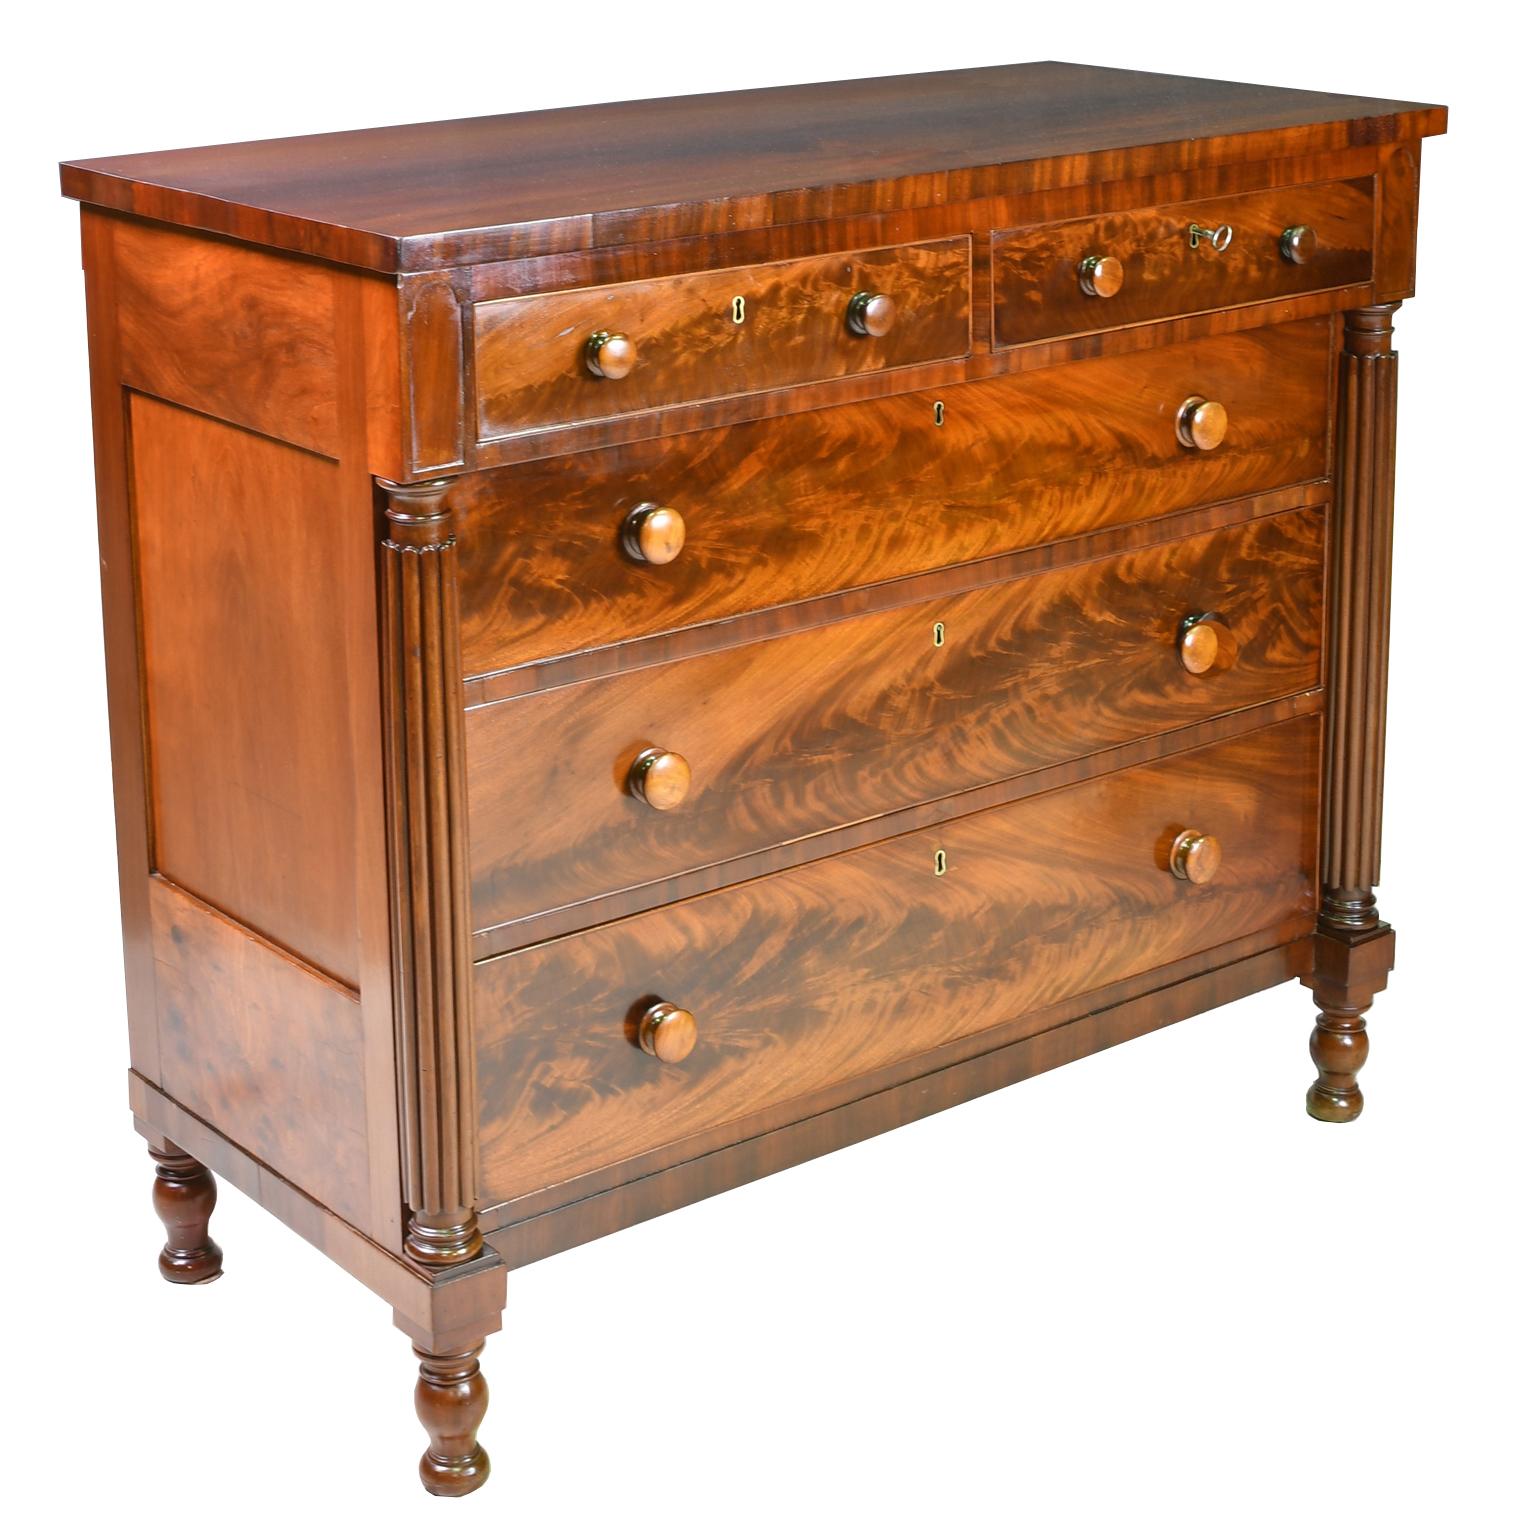 Polished American Federal Chest of Drawers in West Indies Mahogany, Baltimore, circa 1835 For Sale